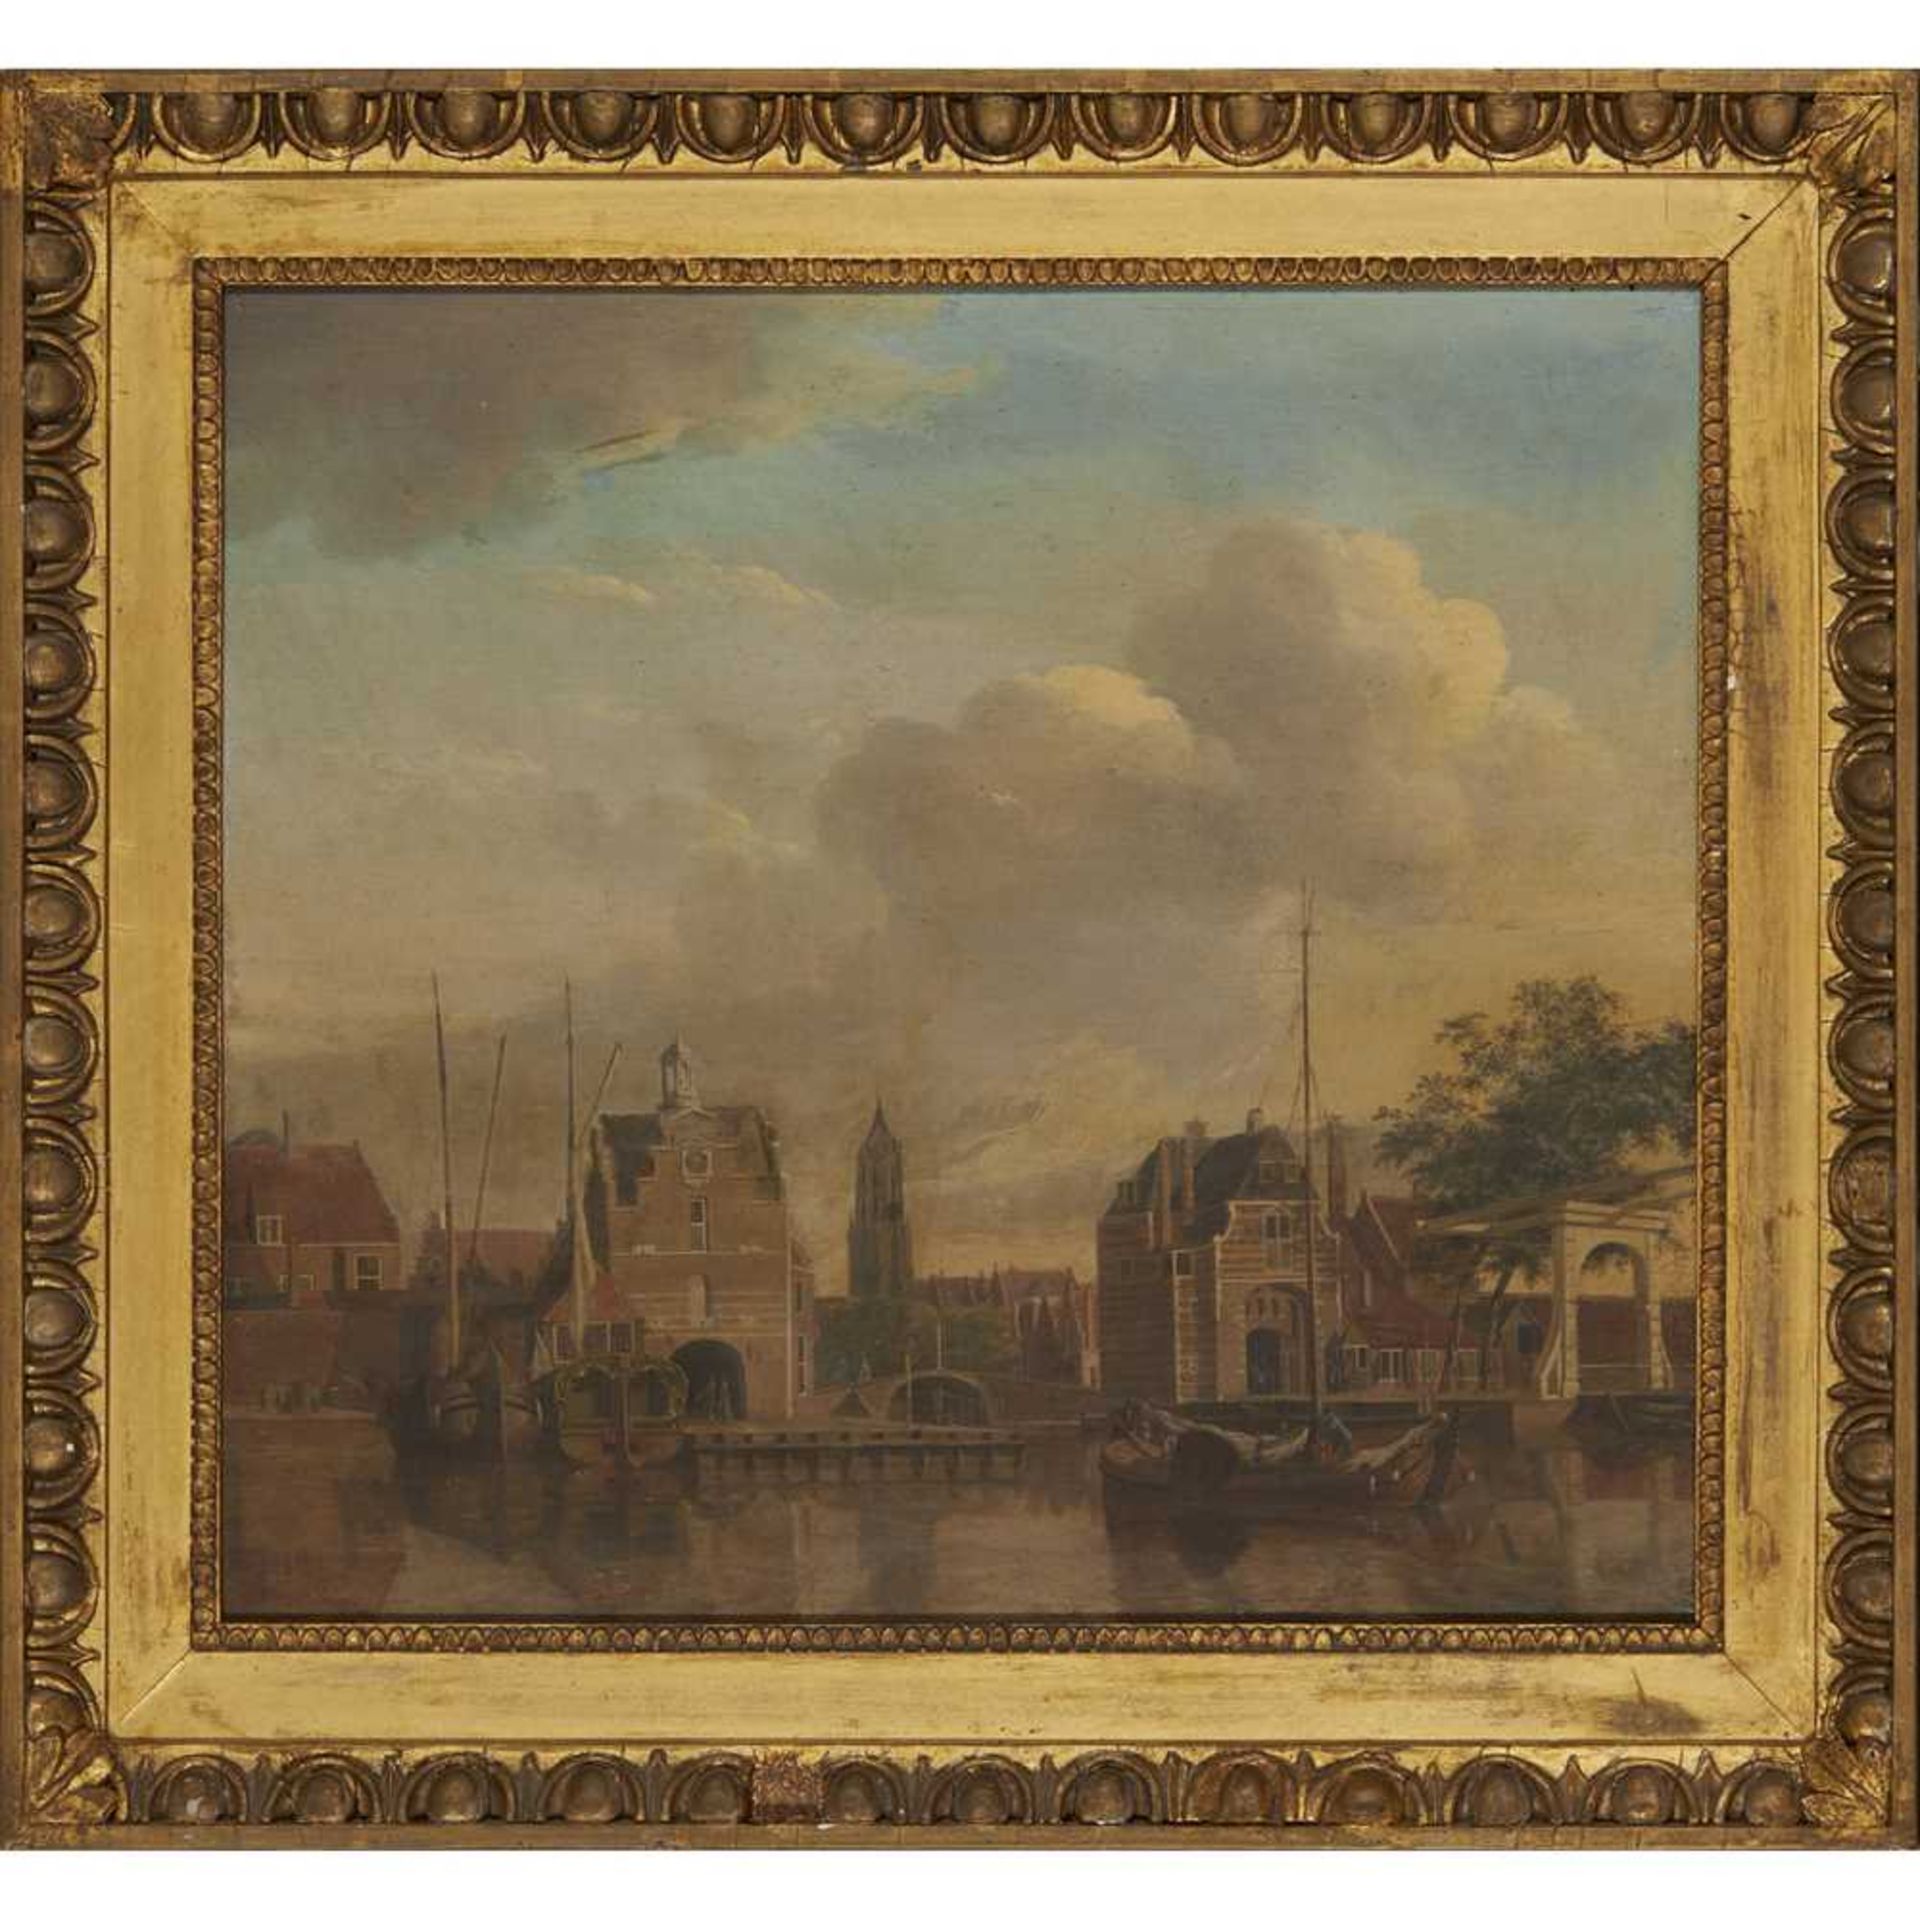 FOLLOWER OF ISAAC OUWATER A DUTCH CANAL SCENE - Image 2 of 3